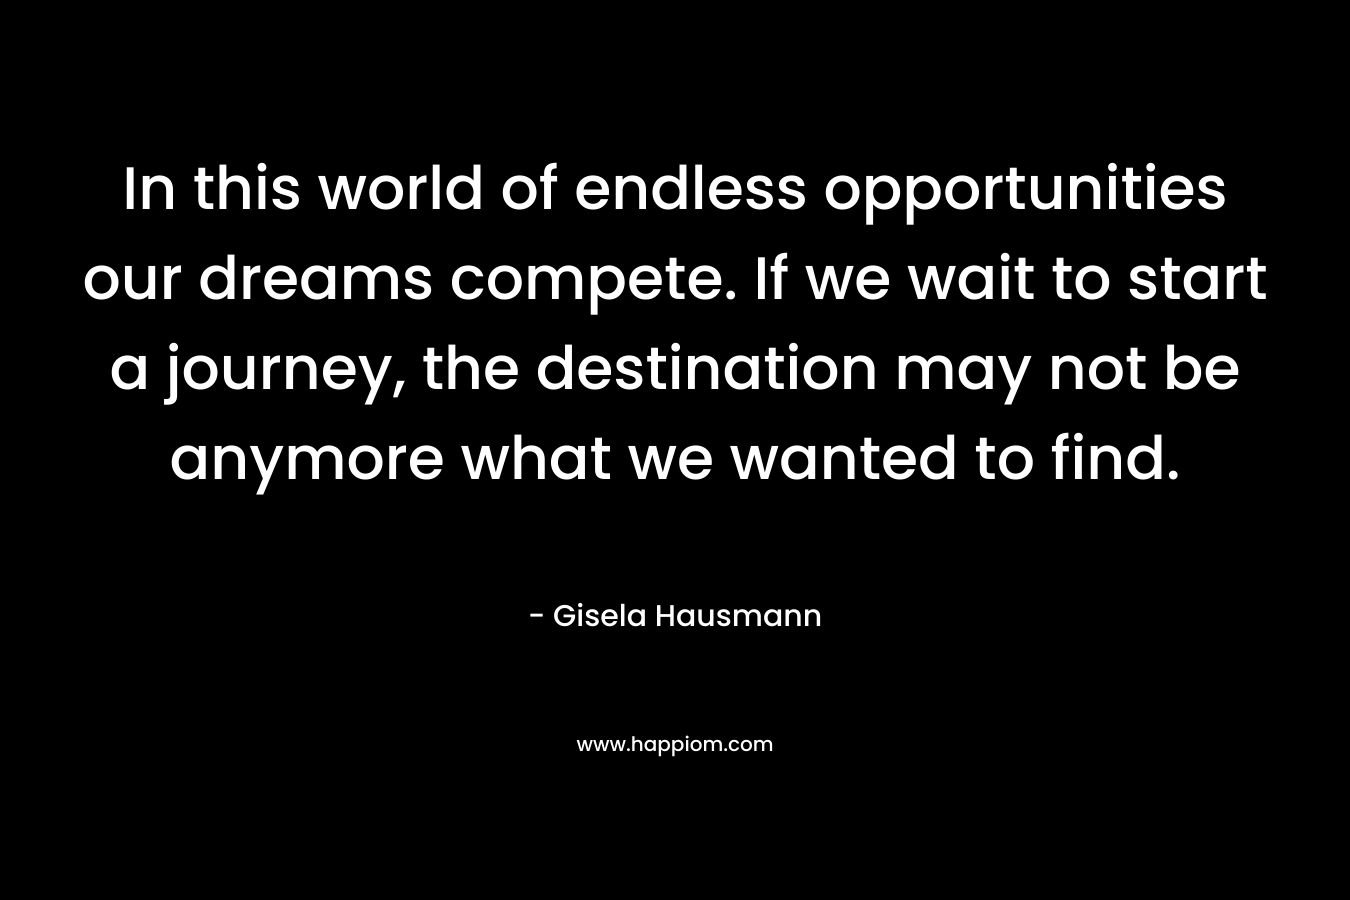 In this world of endless opportunities our dreams compete. If we wait to start a journey, the destination may not be anymore what we wanted to find.